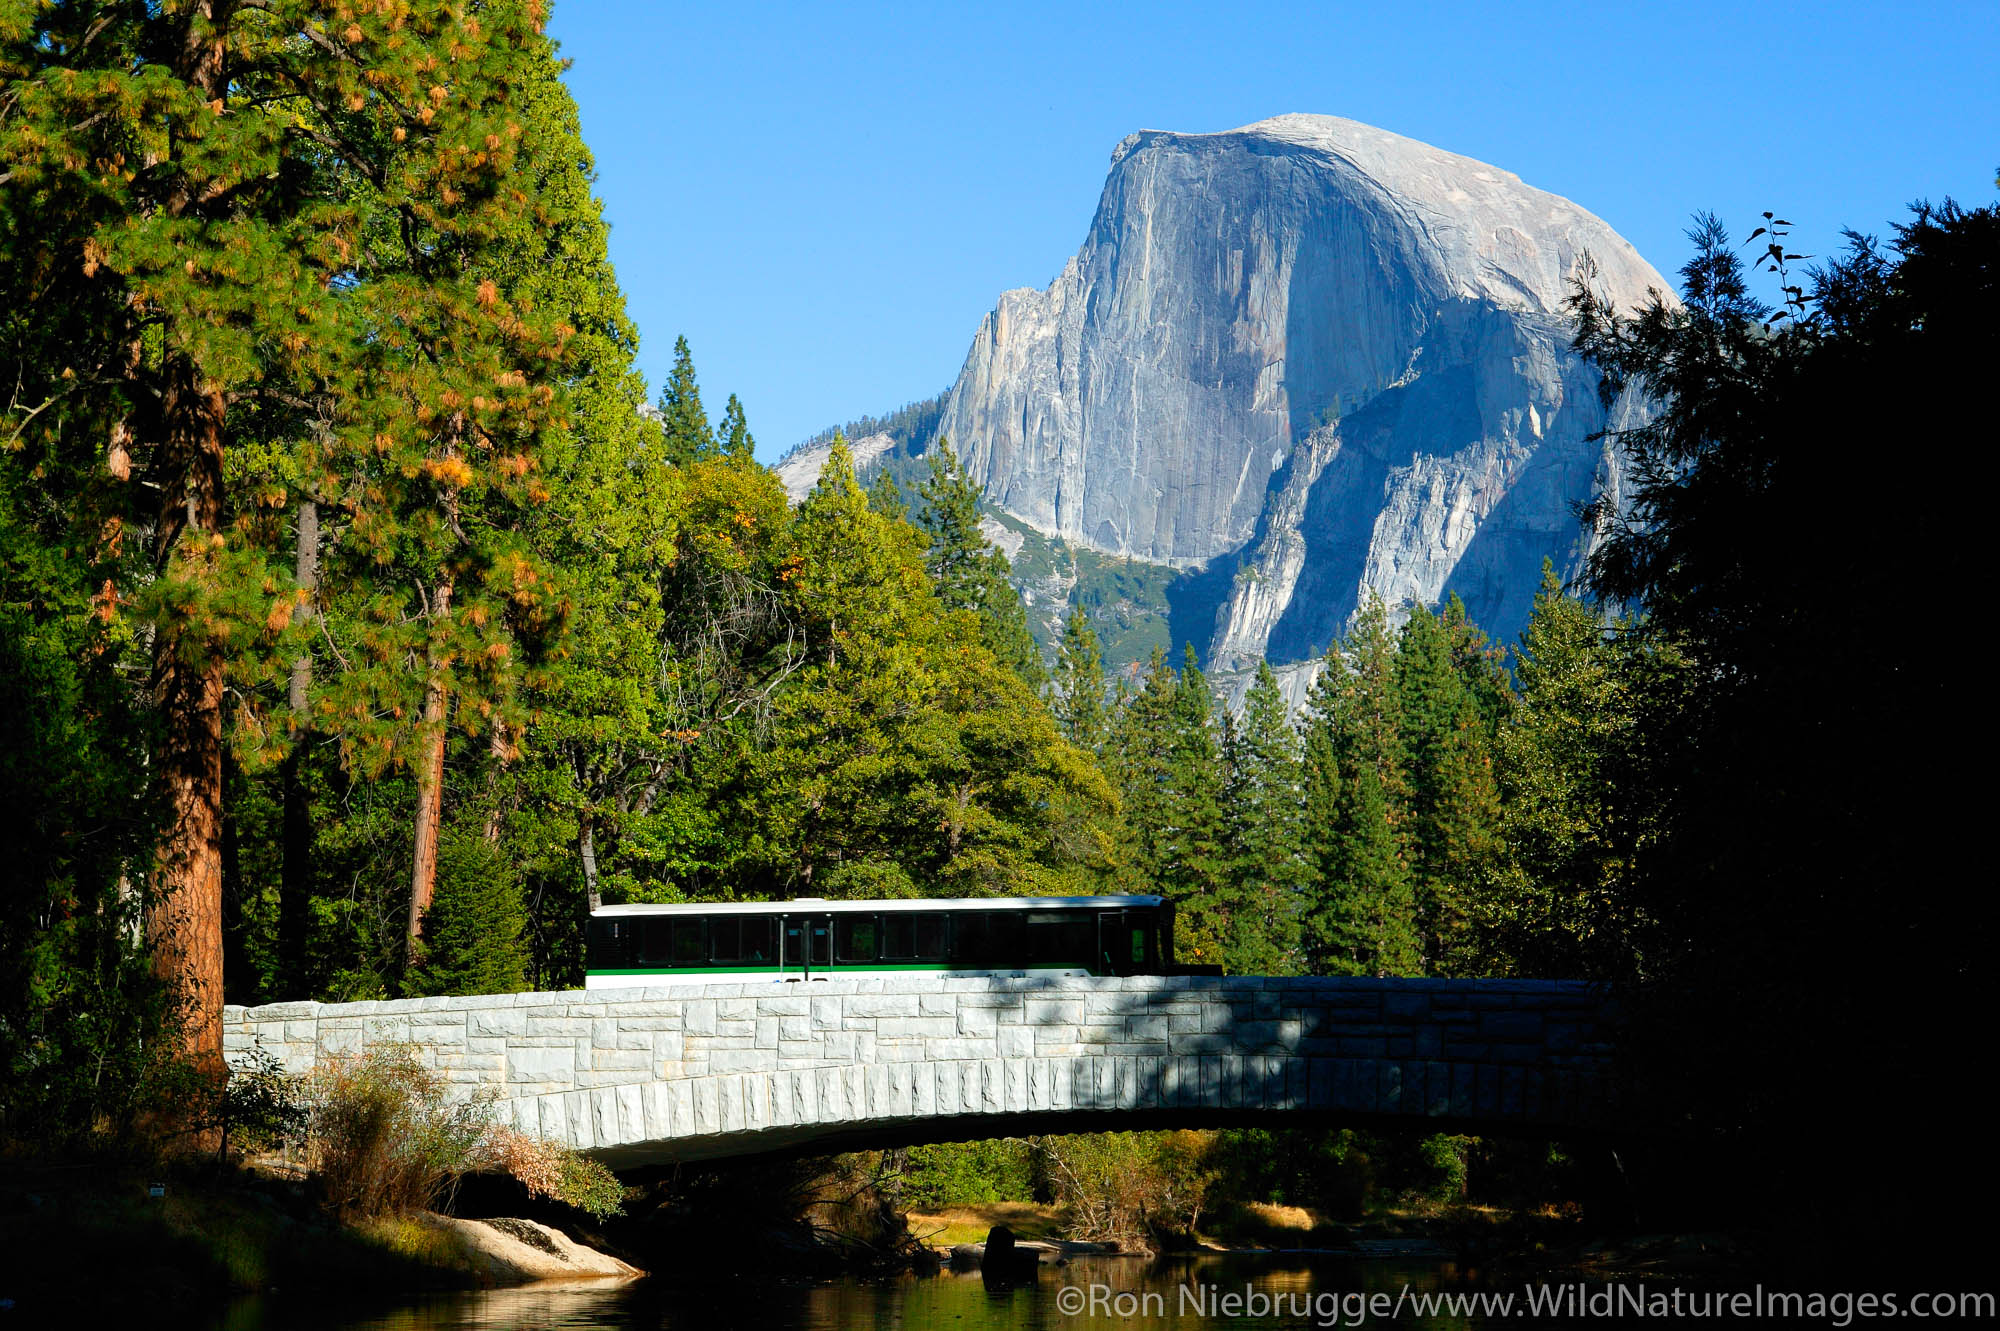 The shuttle bus on the  bridge over Merecd River with Half Dome in the background, Yosemite National Park, California.